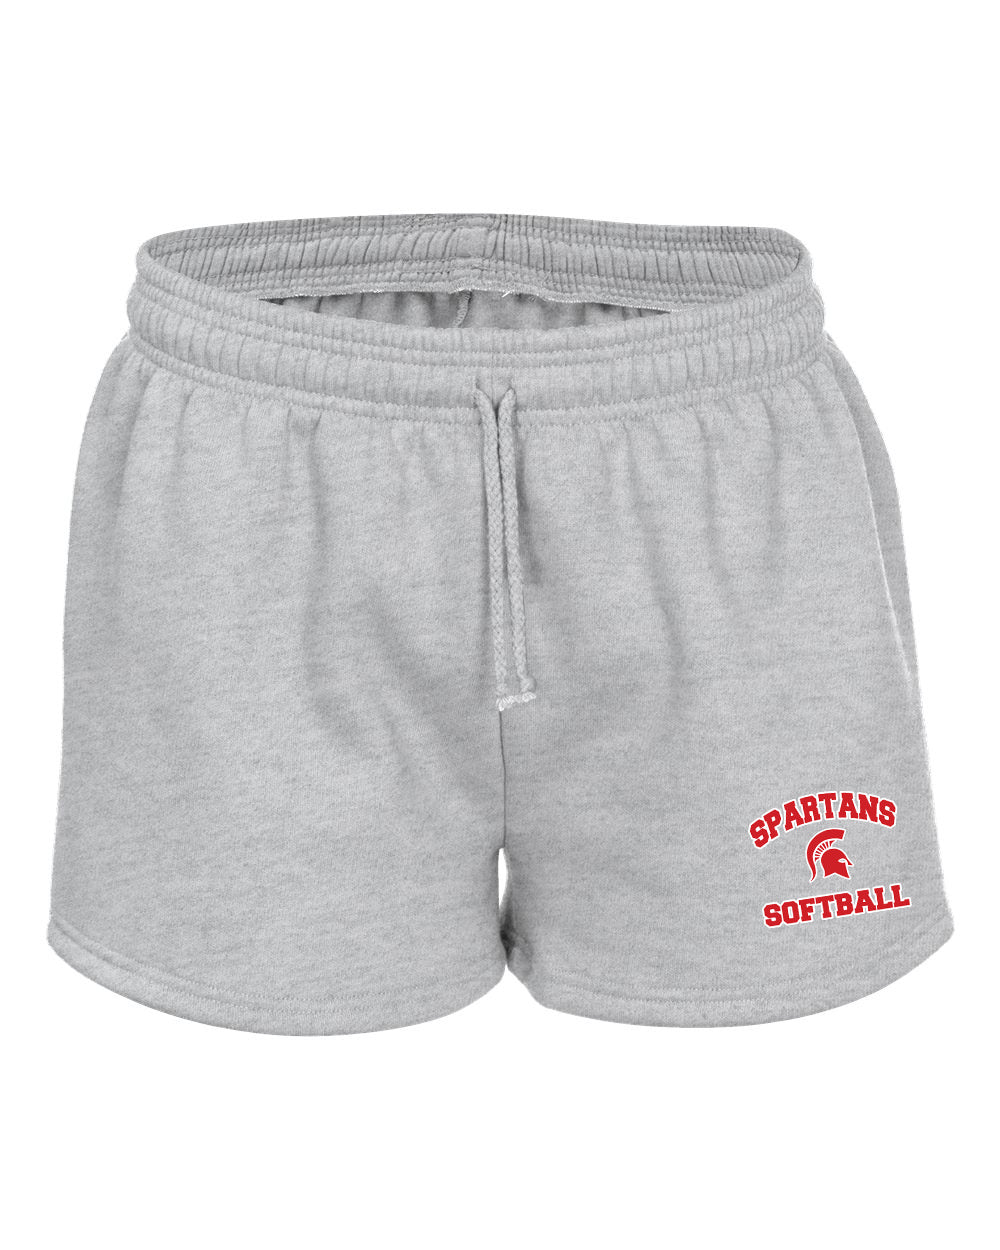 ELGS Ladies Badger Fleece shorts - 1203 (color options available)